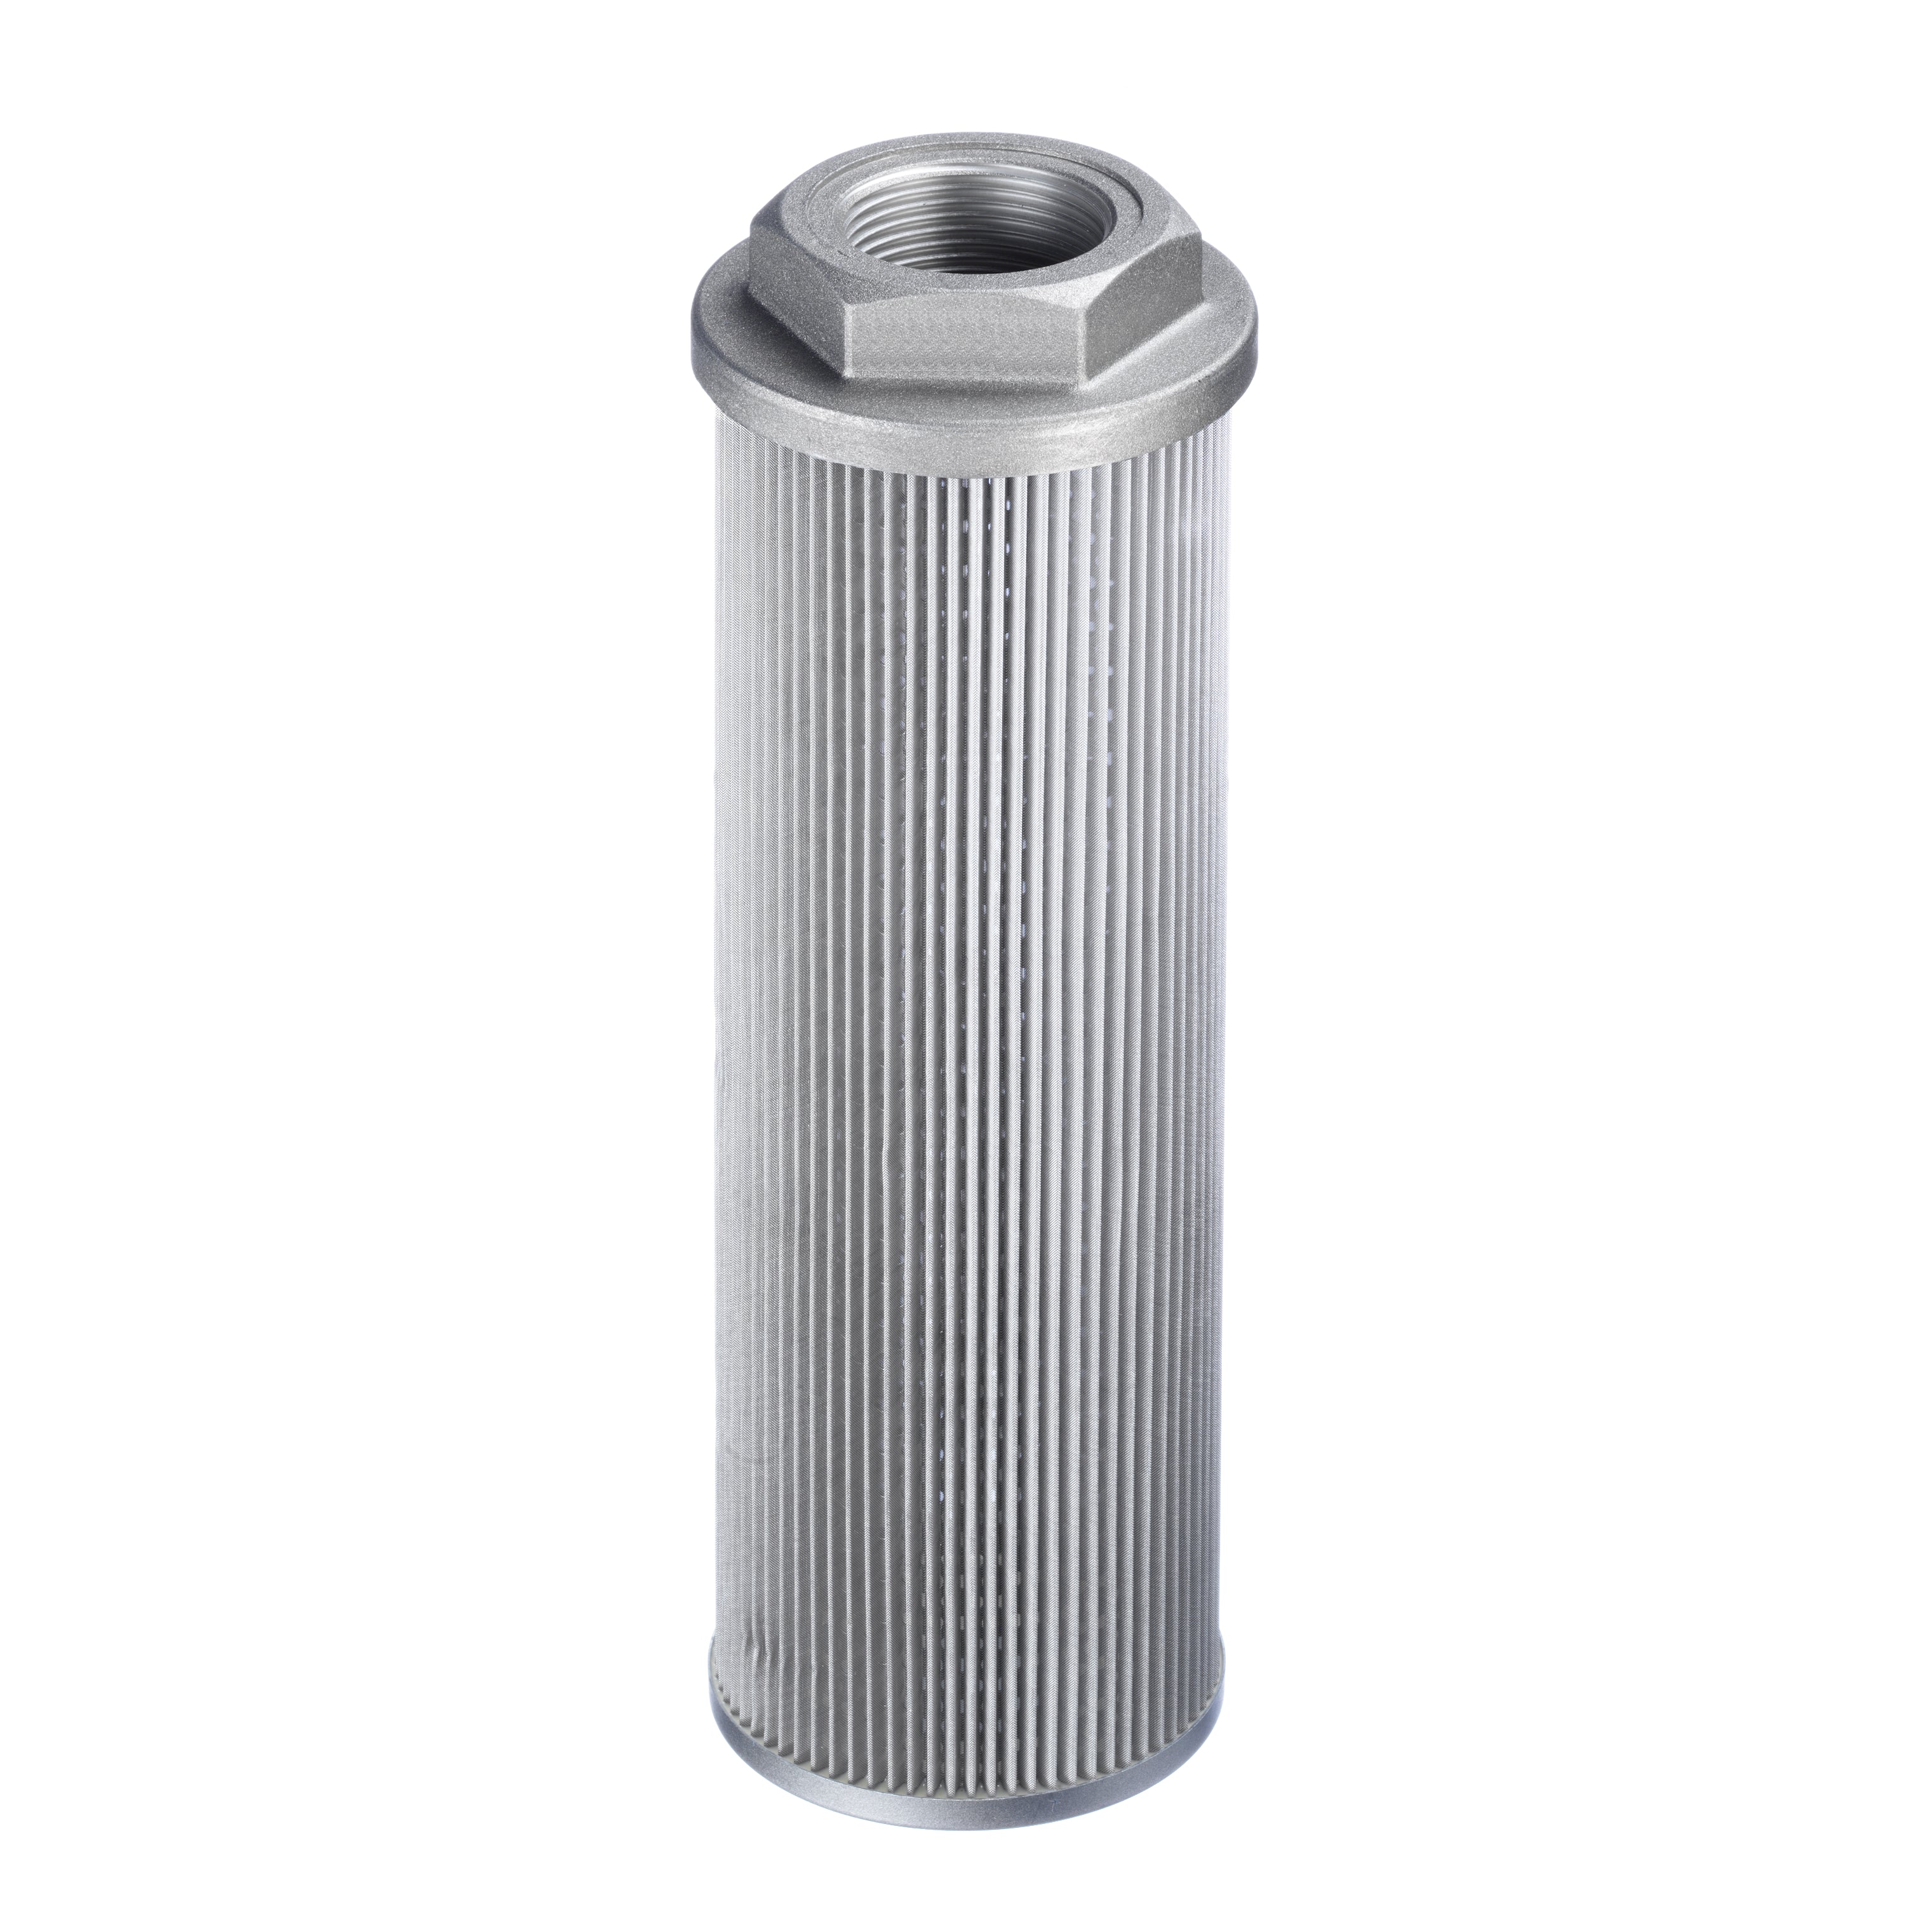 SUS-050-N06-090-125-A-O : Stauff Suction Strainer, Aluminum End Cap, 3/8" NPT, 3.1GPM, 125 Micron, No Bypass